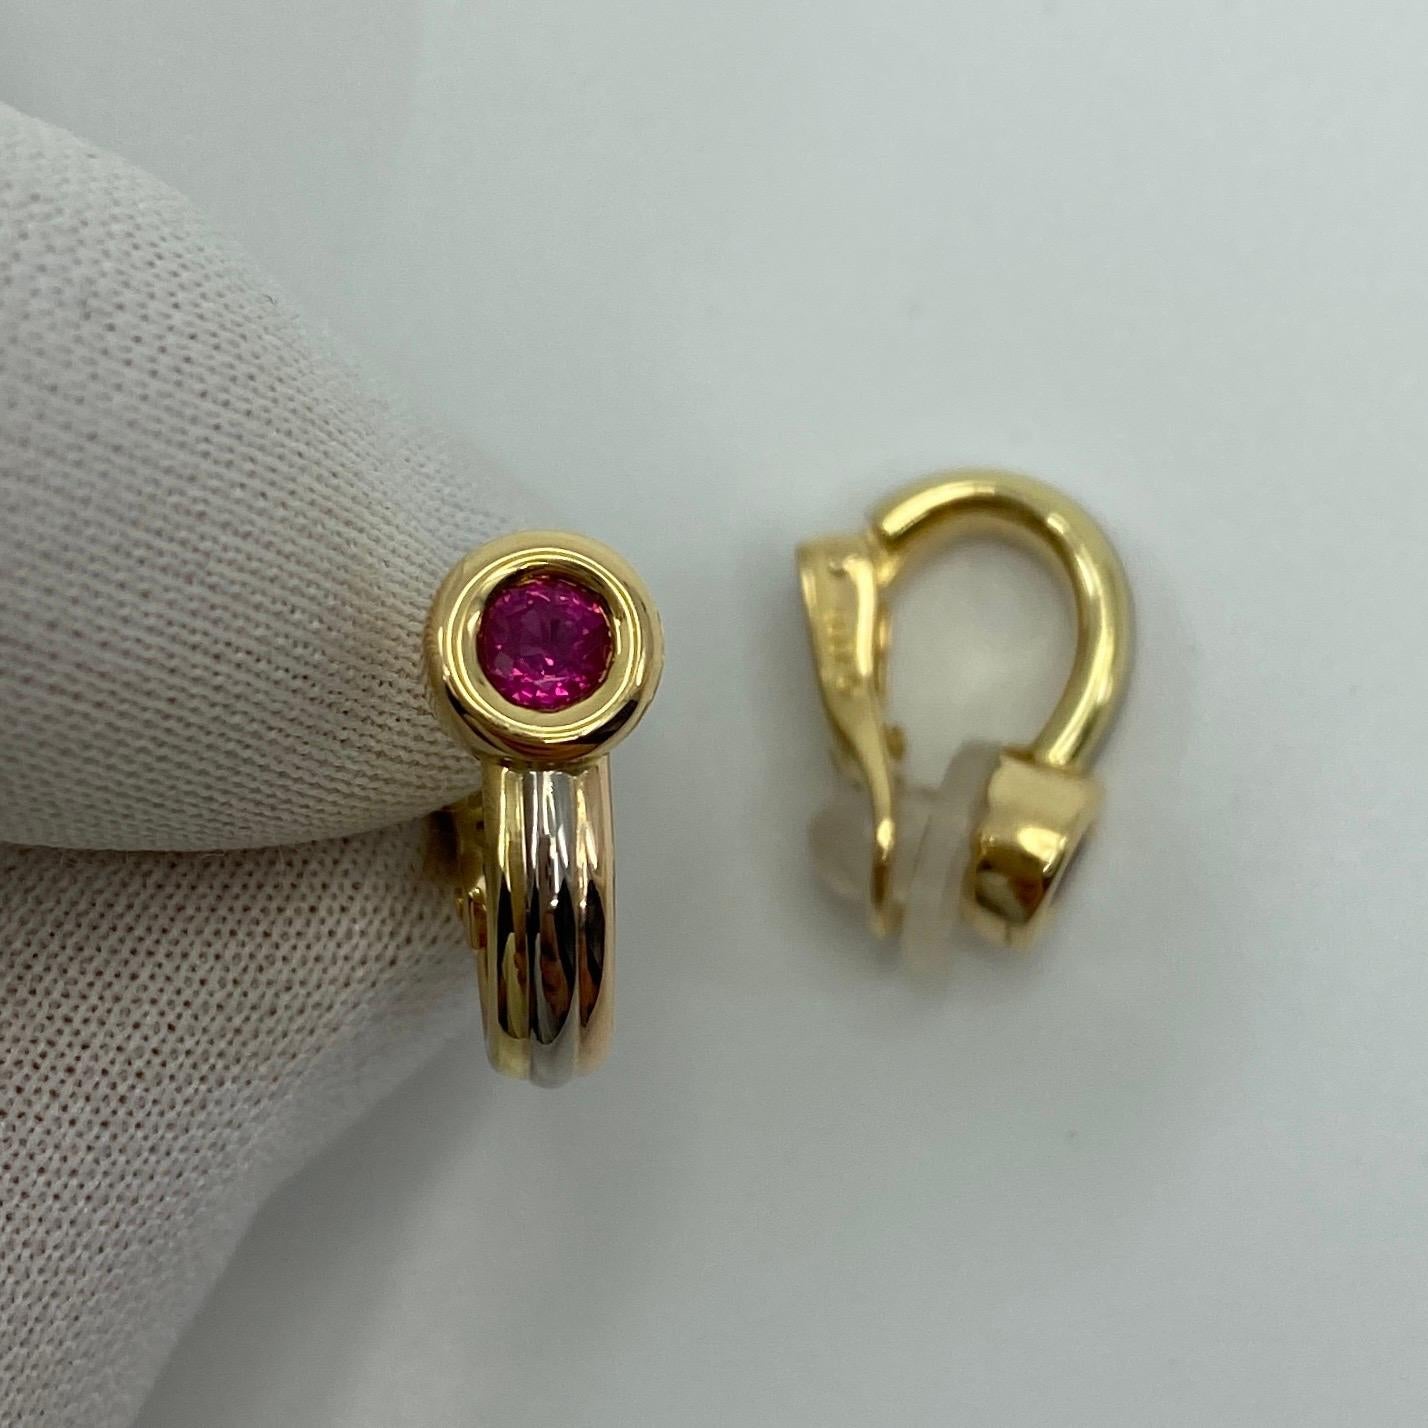 Vintage Cartier Vivid Red Ruby 18k Multi Tone Gold Hoop Earrings.

Beautiful earrings featuring stunning vivid red round cut rubies, bezel set in multi tone gold band hoops (yellow, white and rose gold)
Fitted with secure and comfortable clip-on